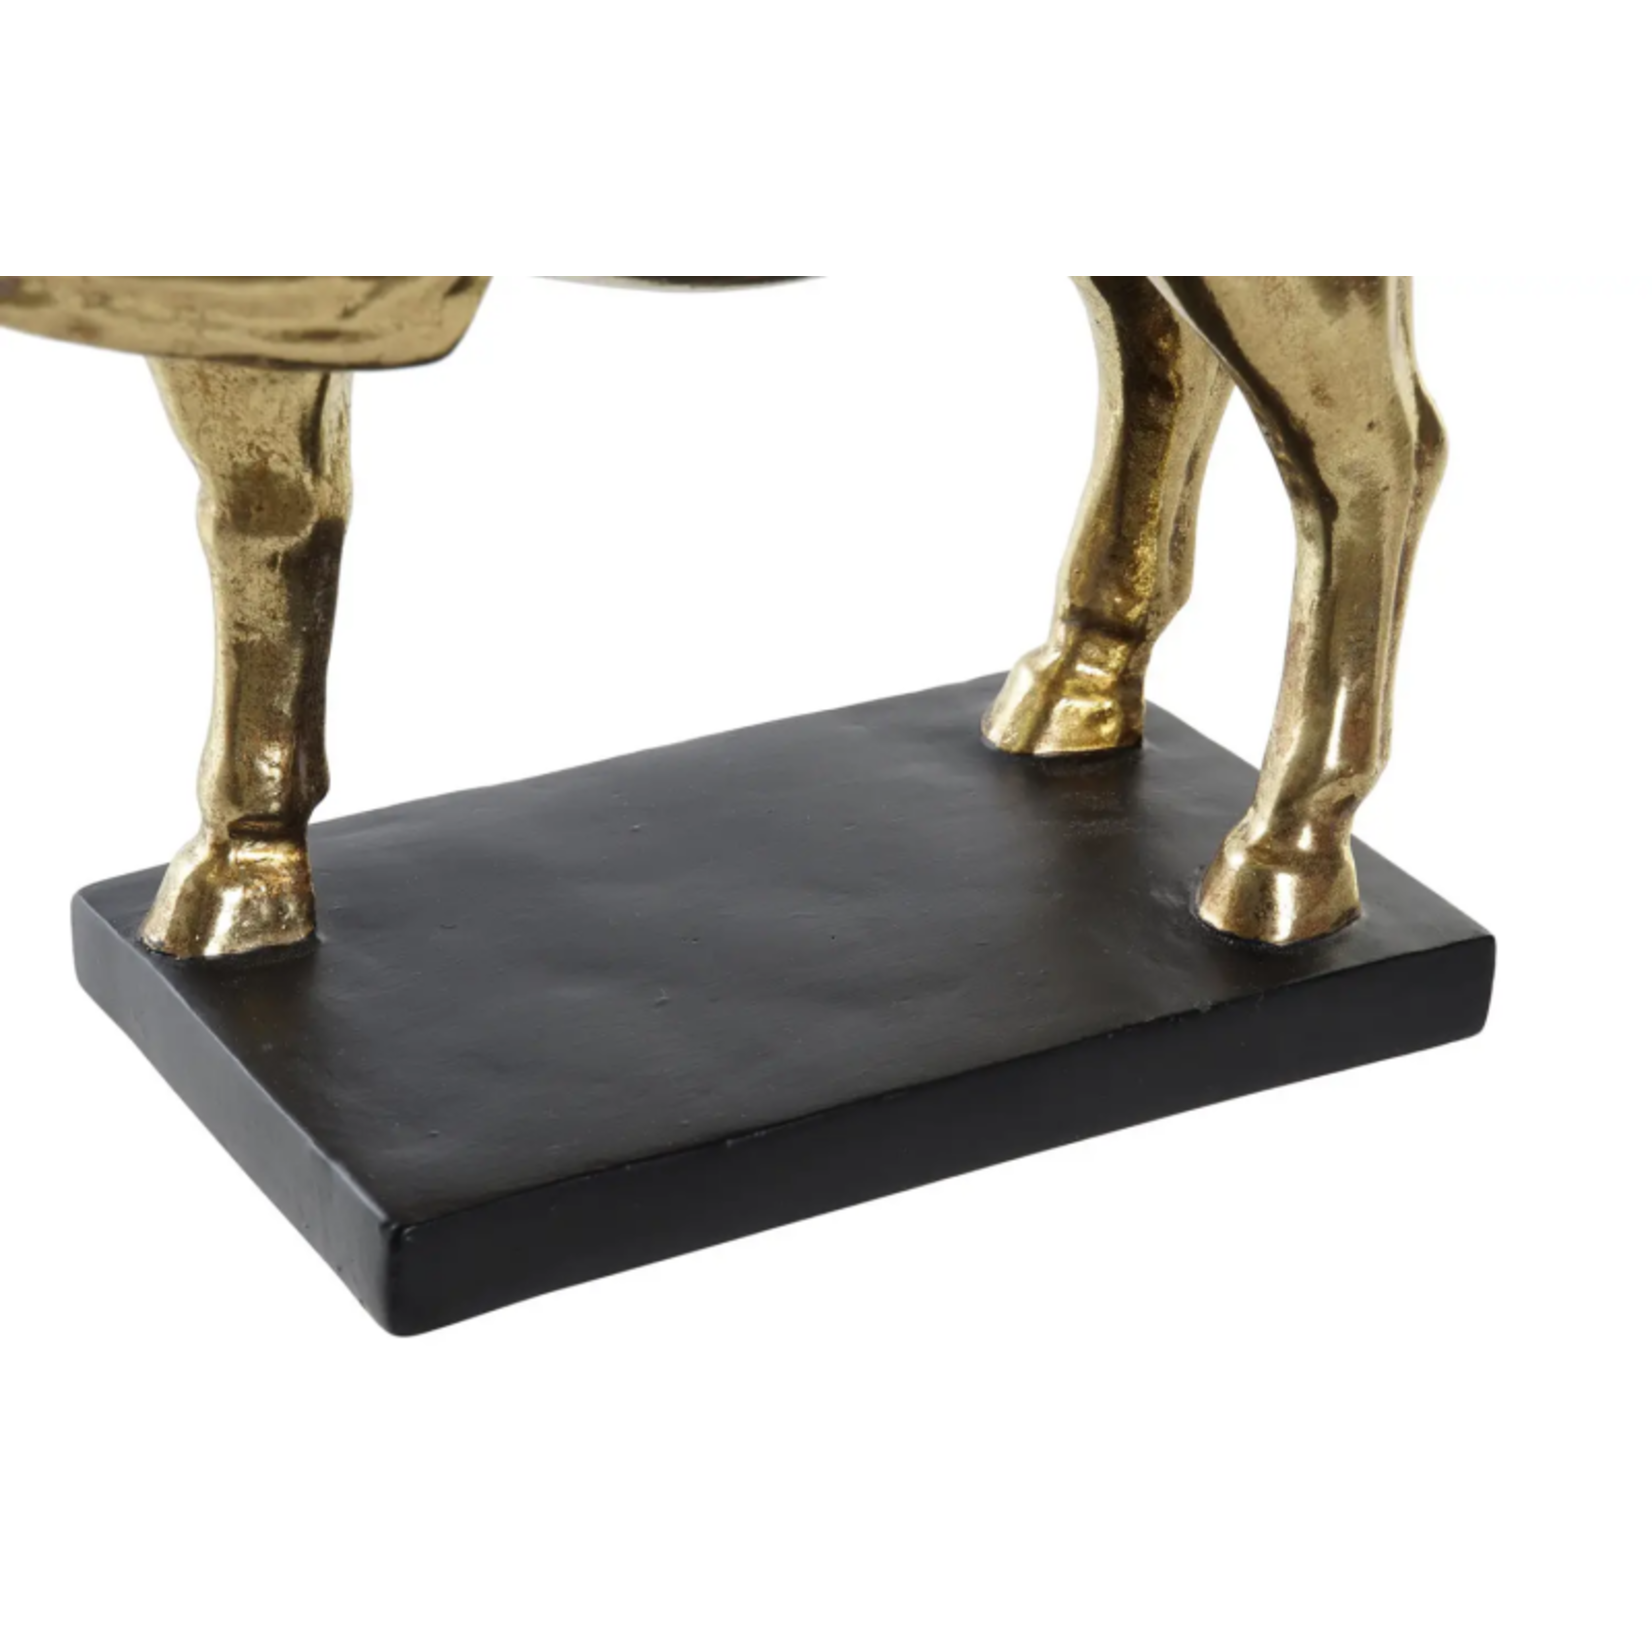 Horses and Lifestyle Equestrian style golden horse